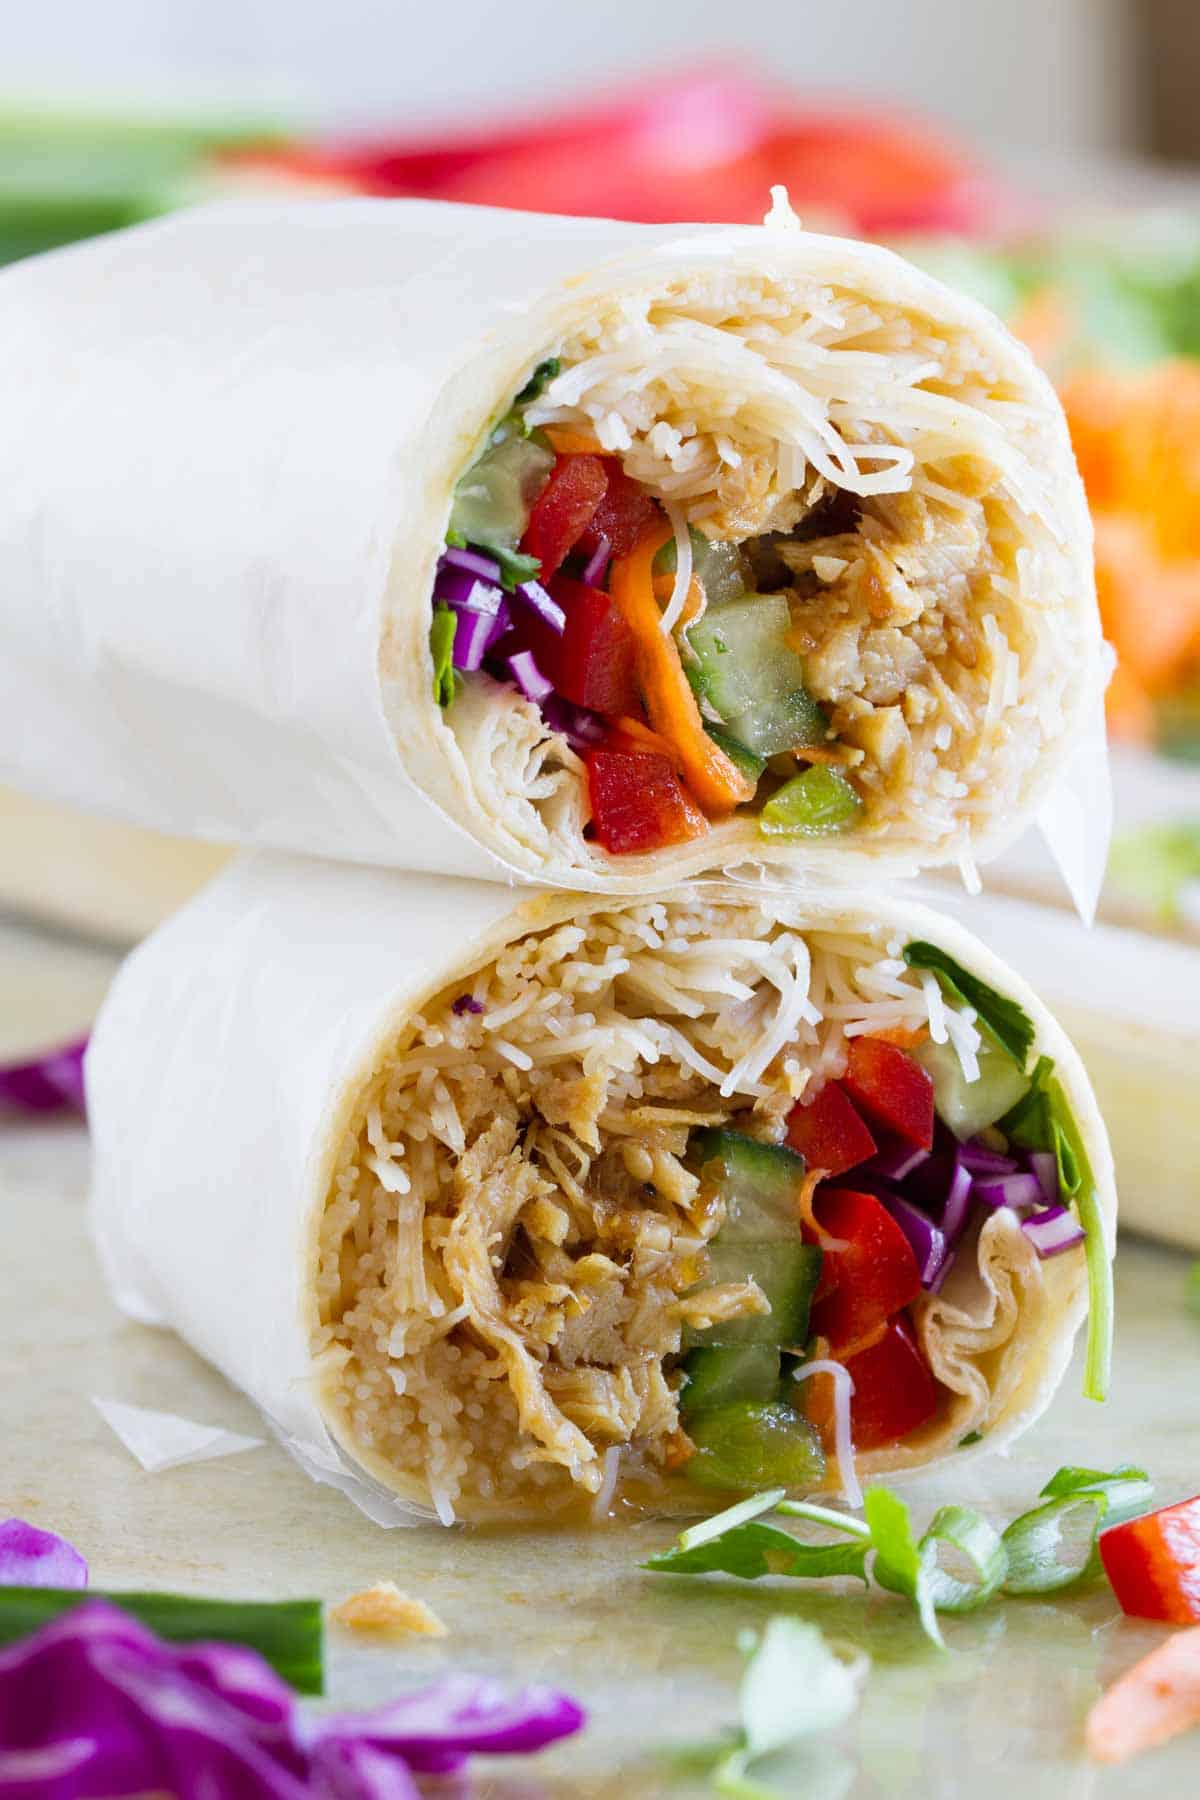 Chicken teriyaki wrap cut in half with halves stacked on top of each other.